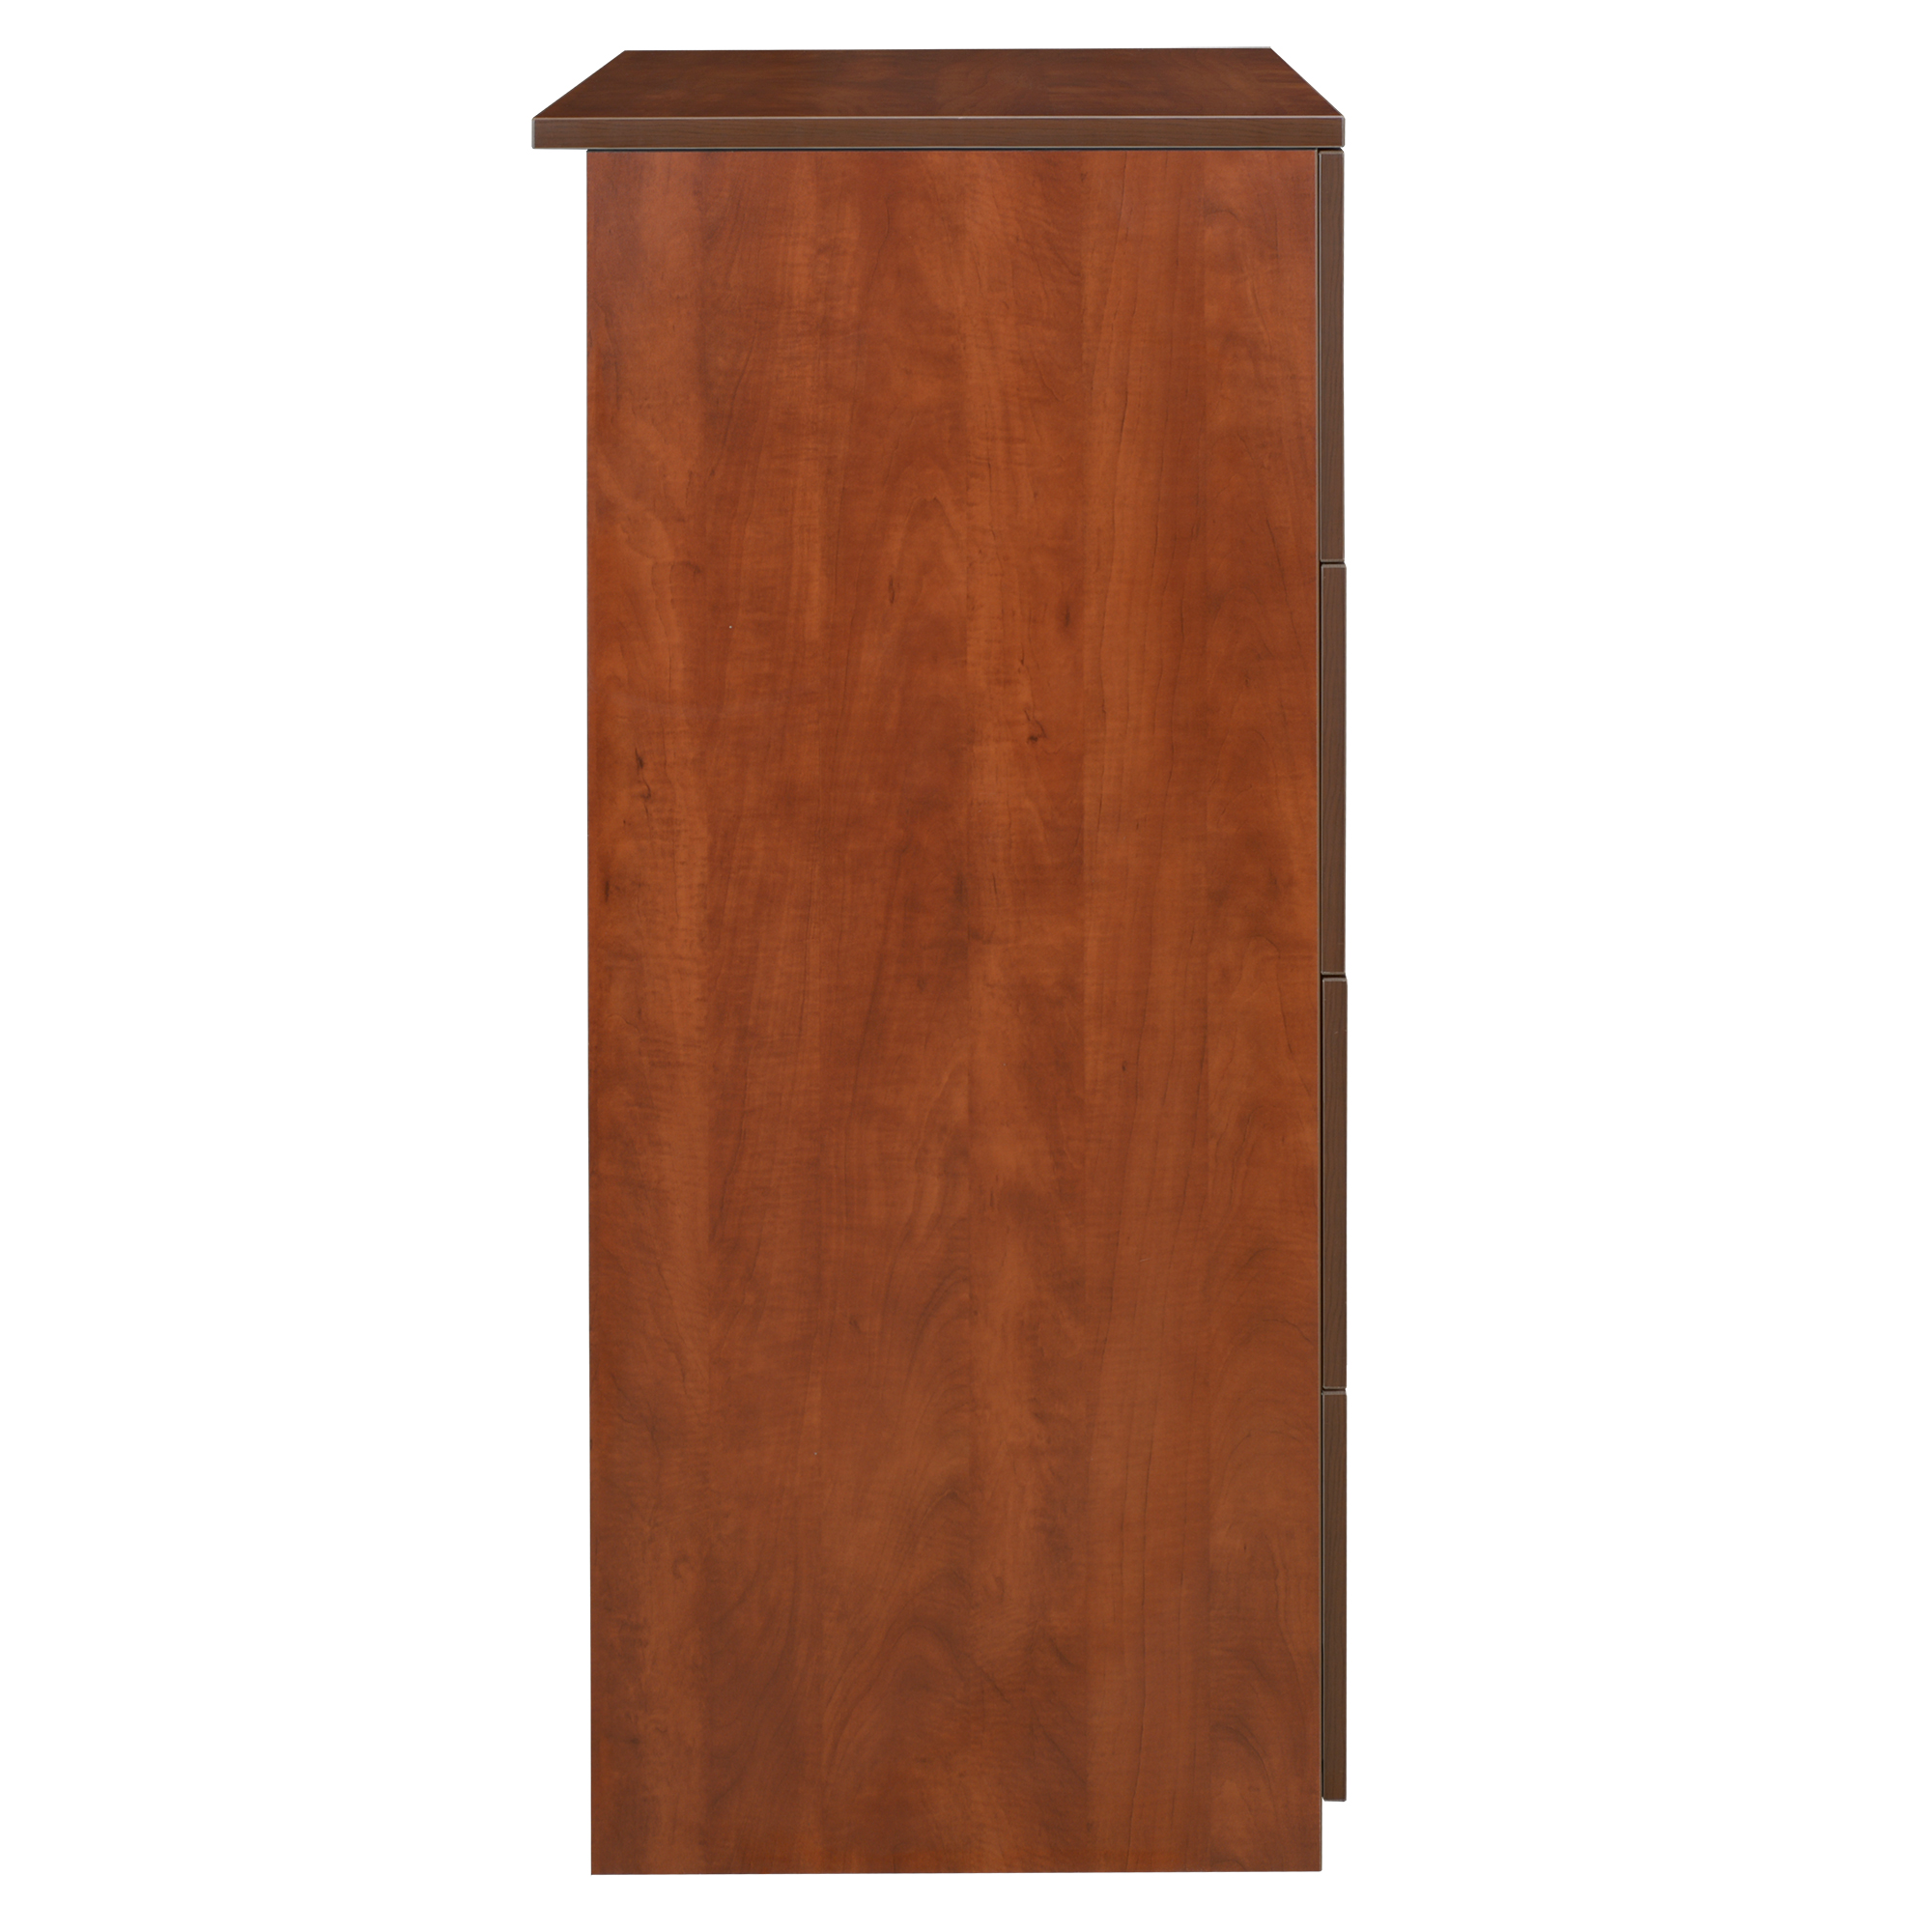 Legacy 4-Drawer Lateral File- Cherry - image 5 of 8